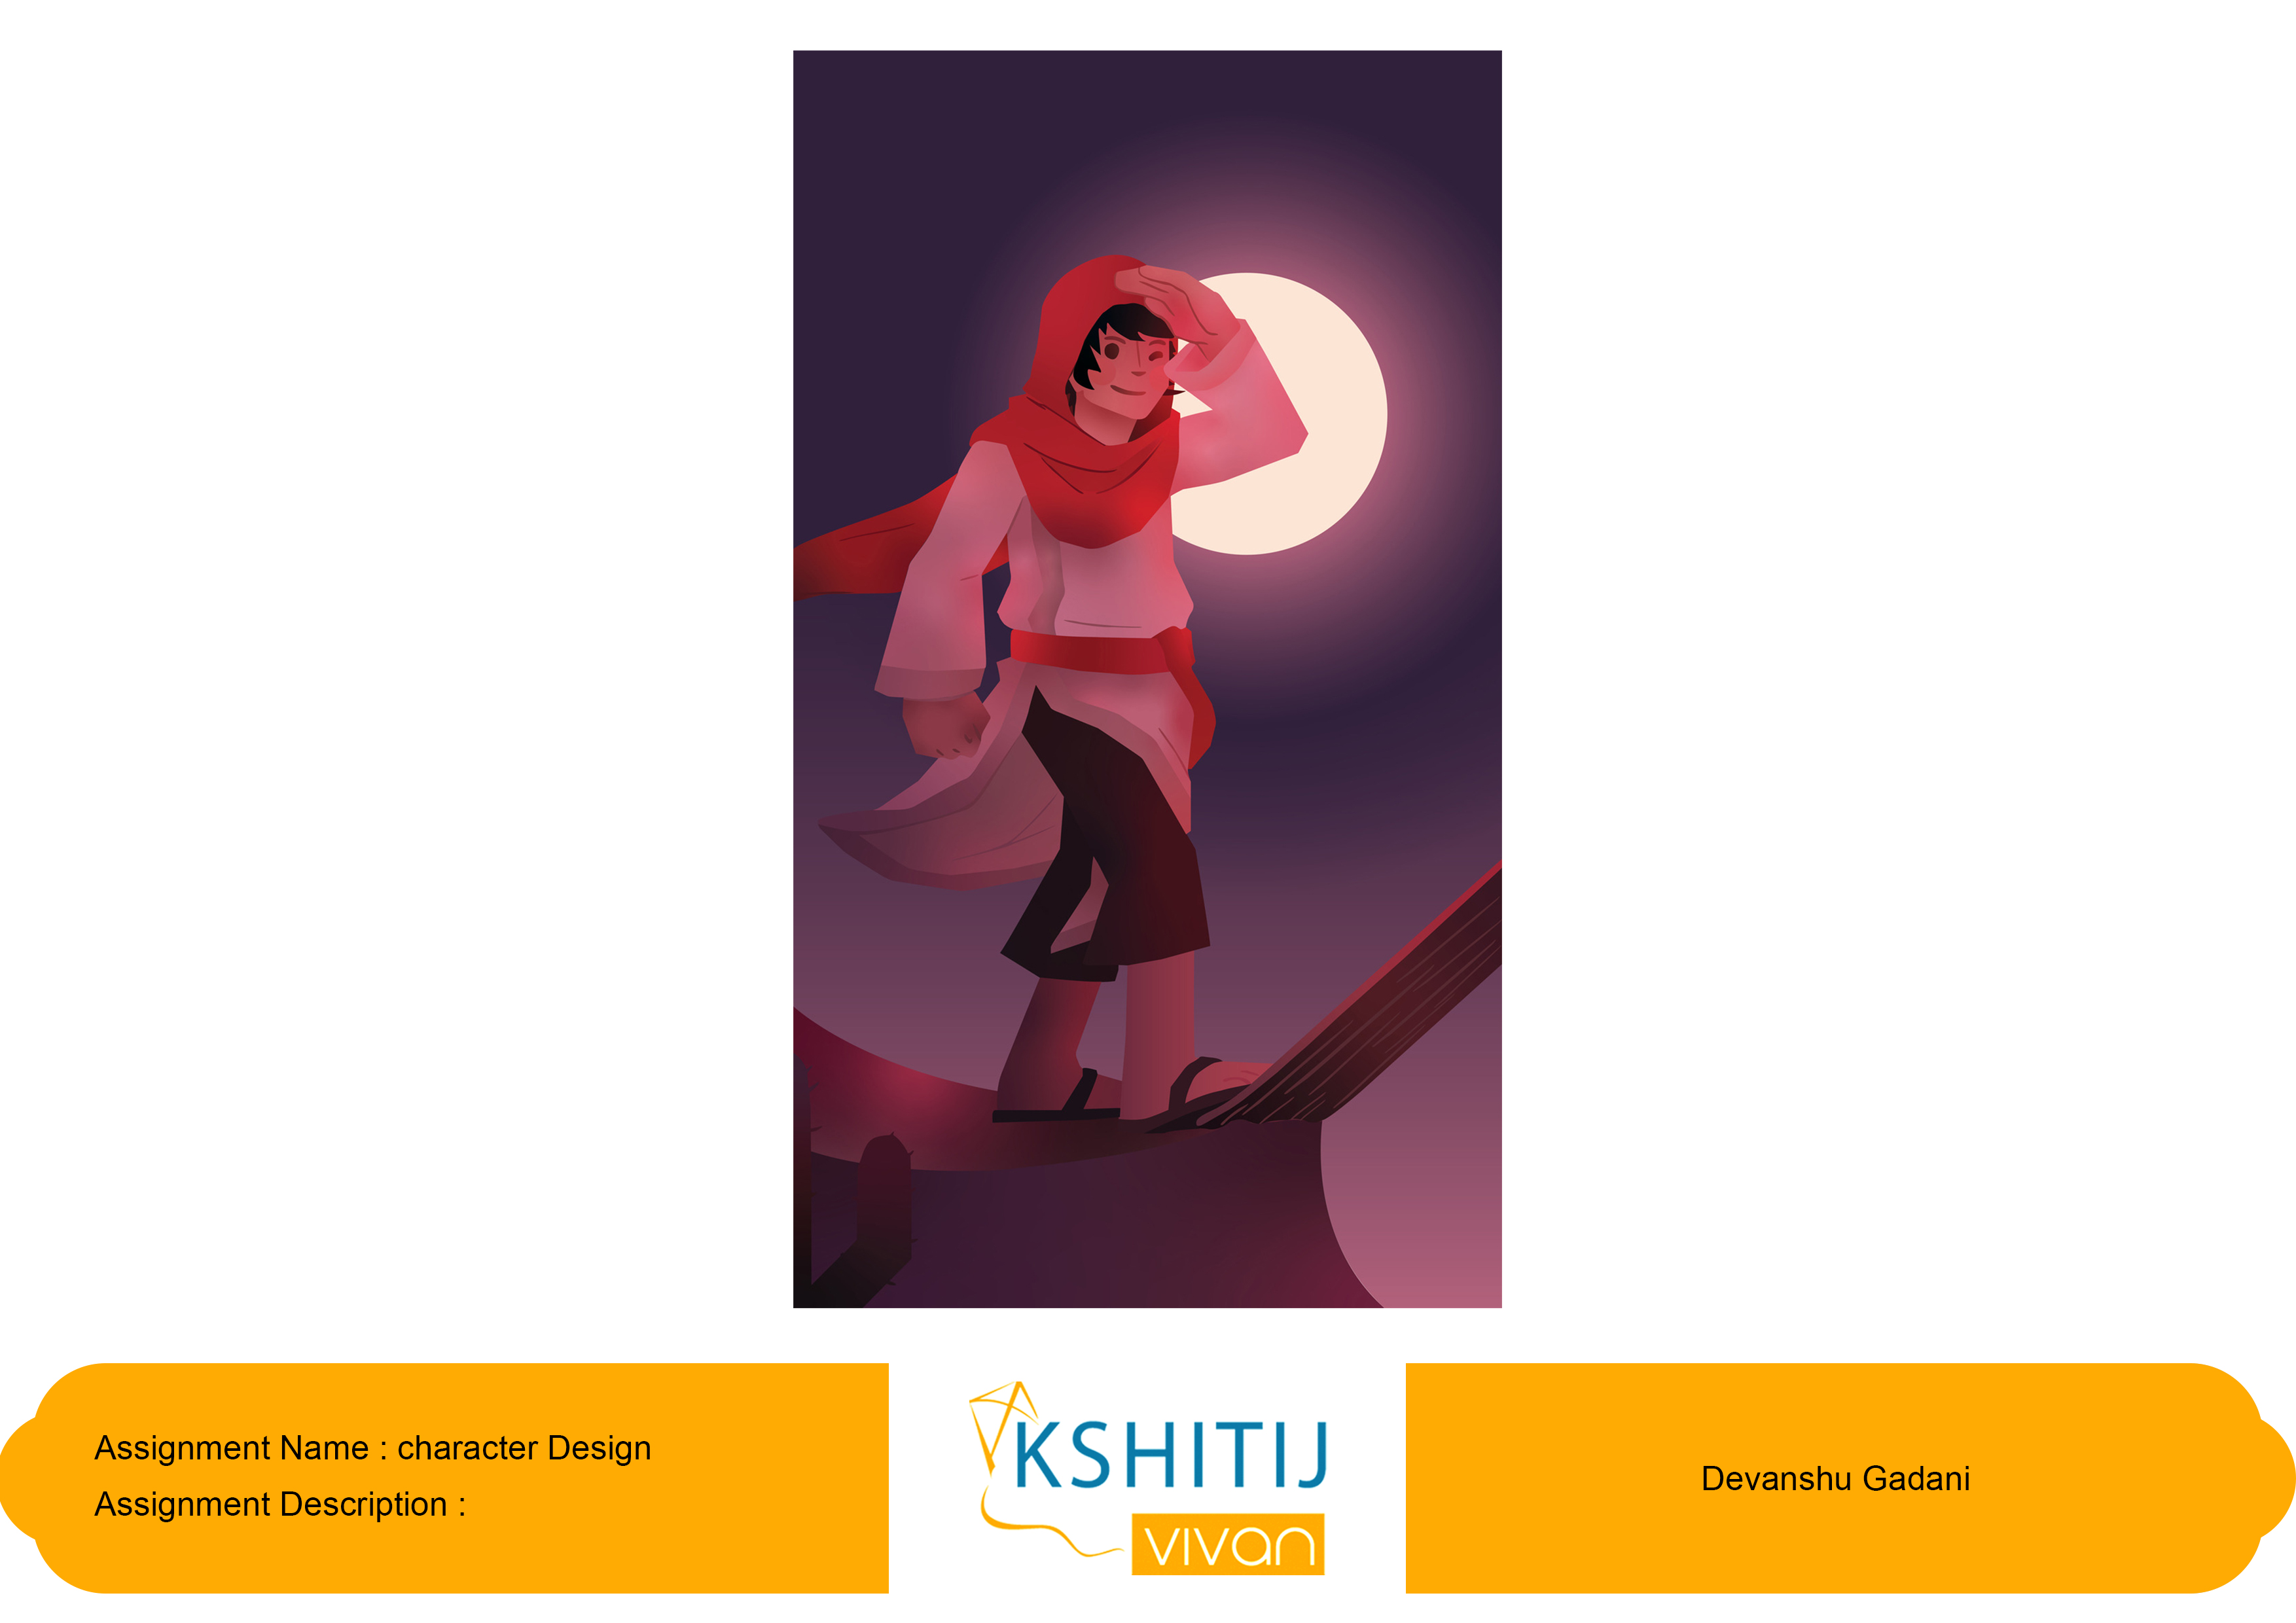 Best Animation and VFX Course Ahmedabad | Kshitij Vivan